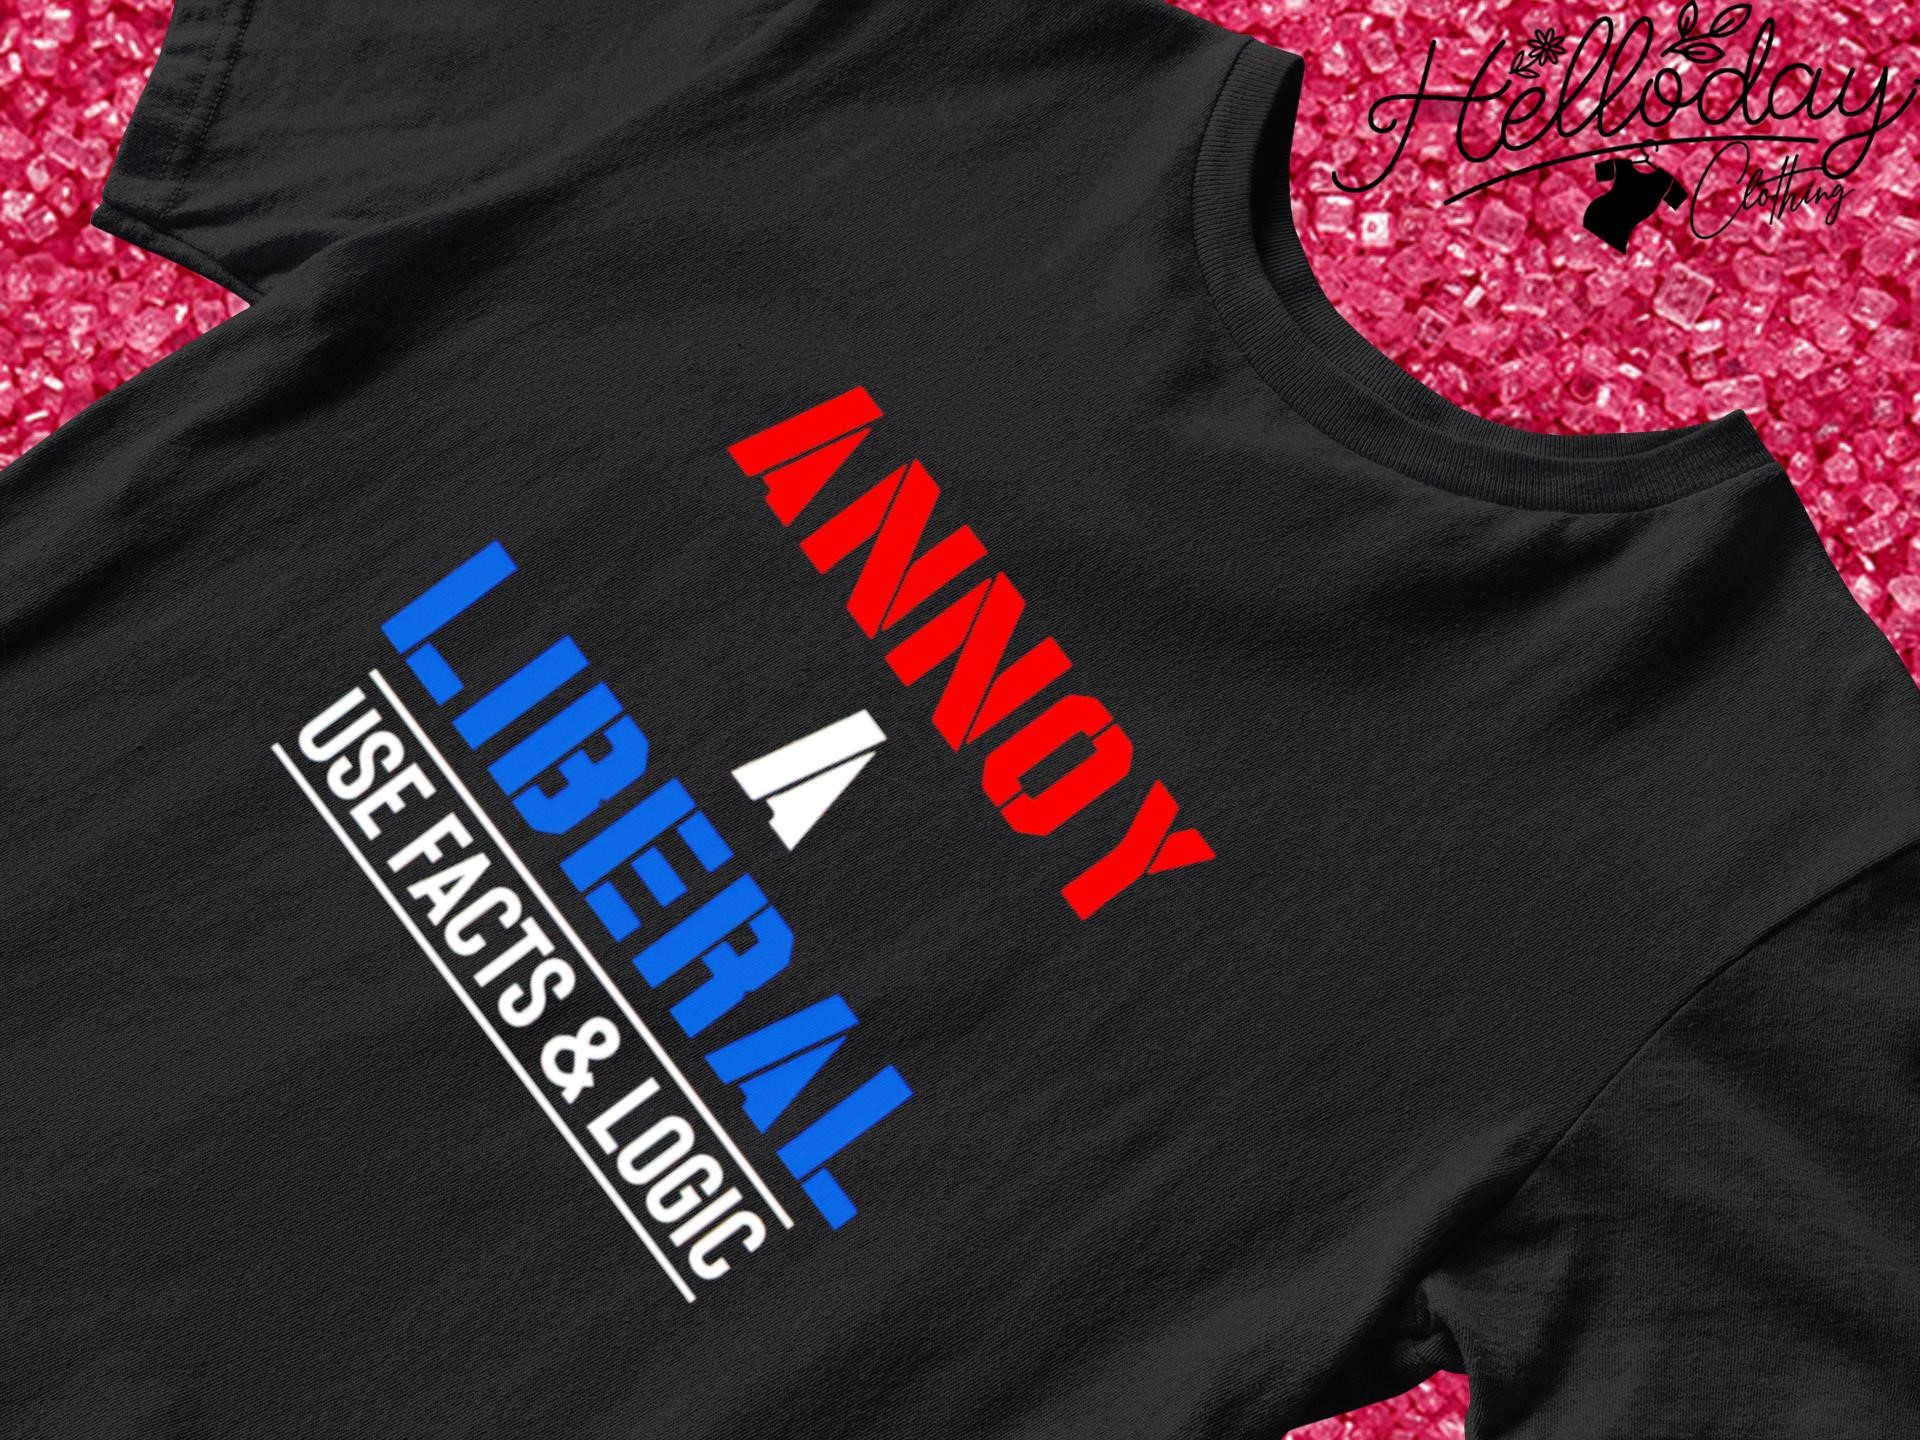 Donald Trump annoy a liberal USE facts and logic shirt